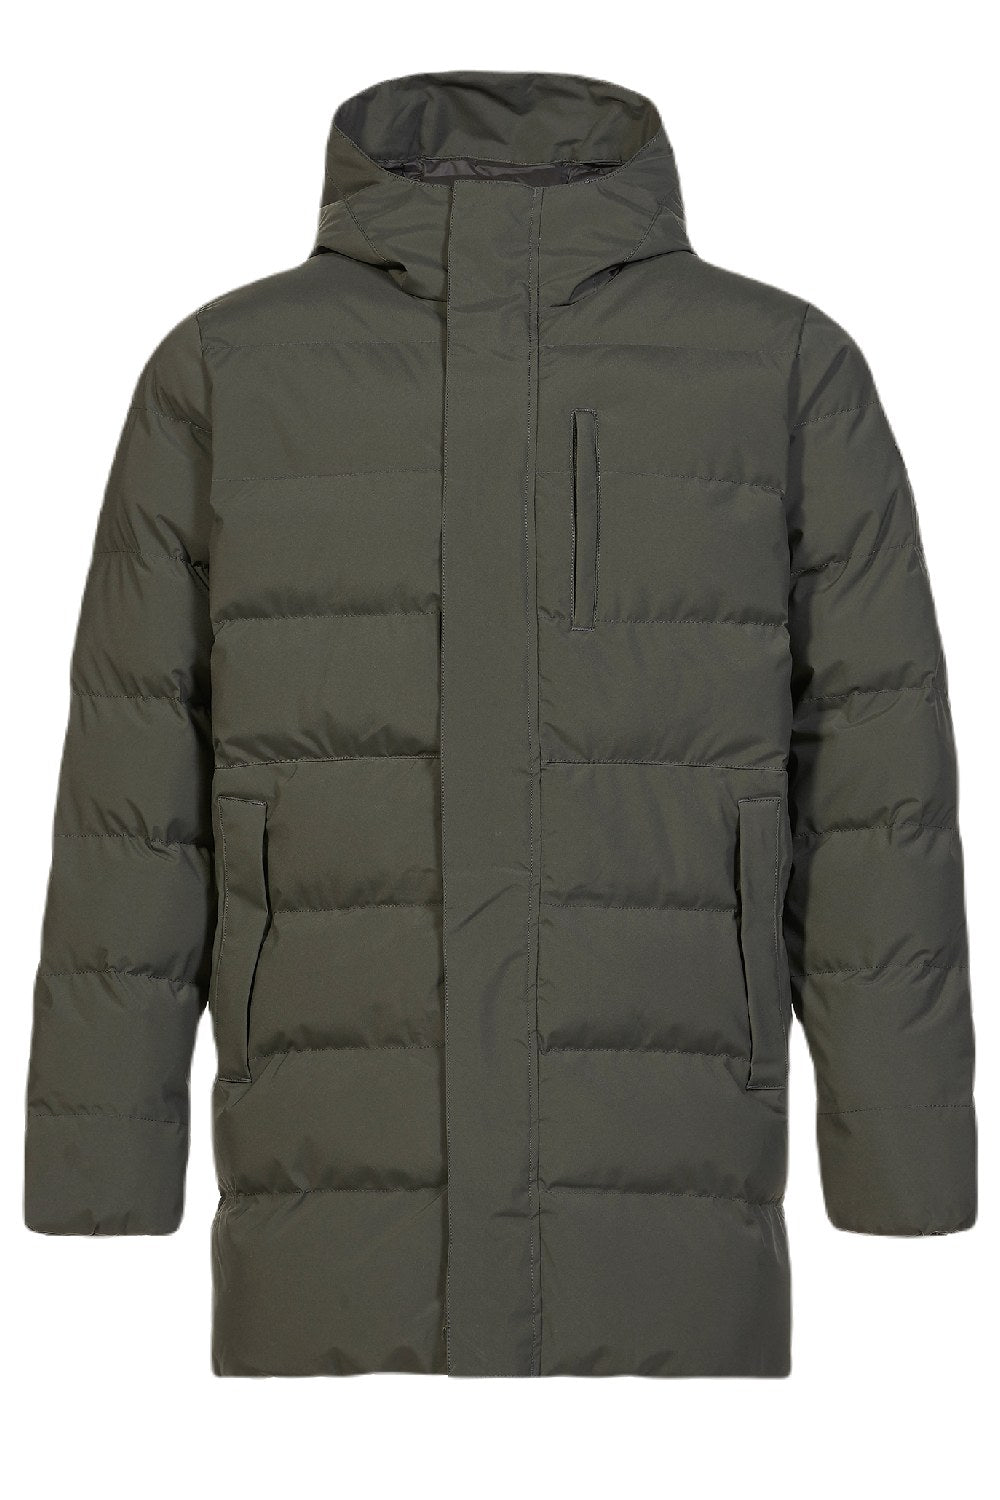 Musto Marina Waterproof Quilted Parka in Field Green 